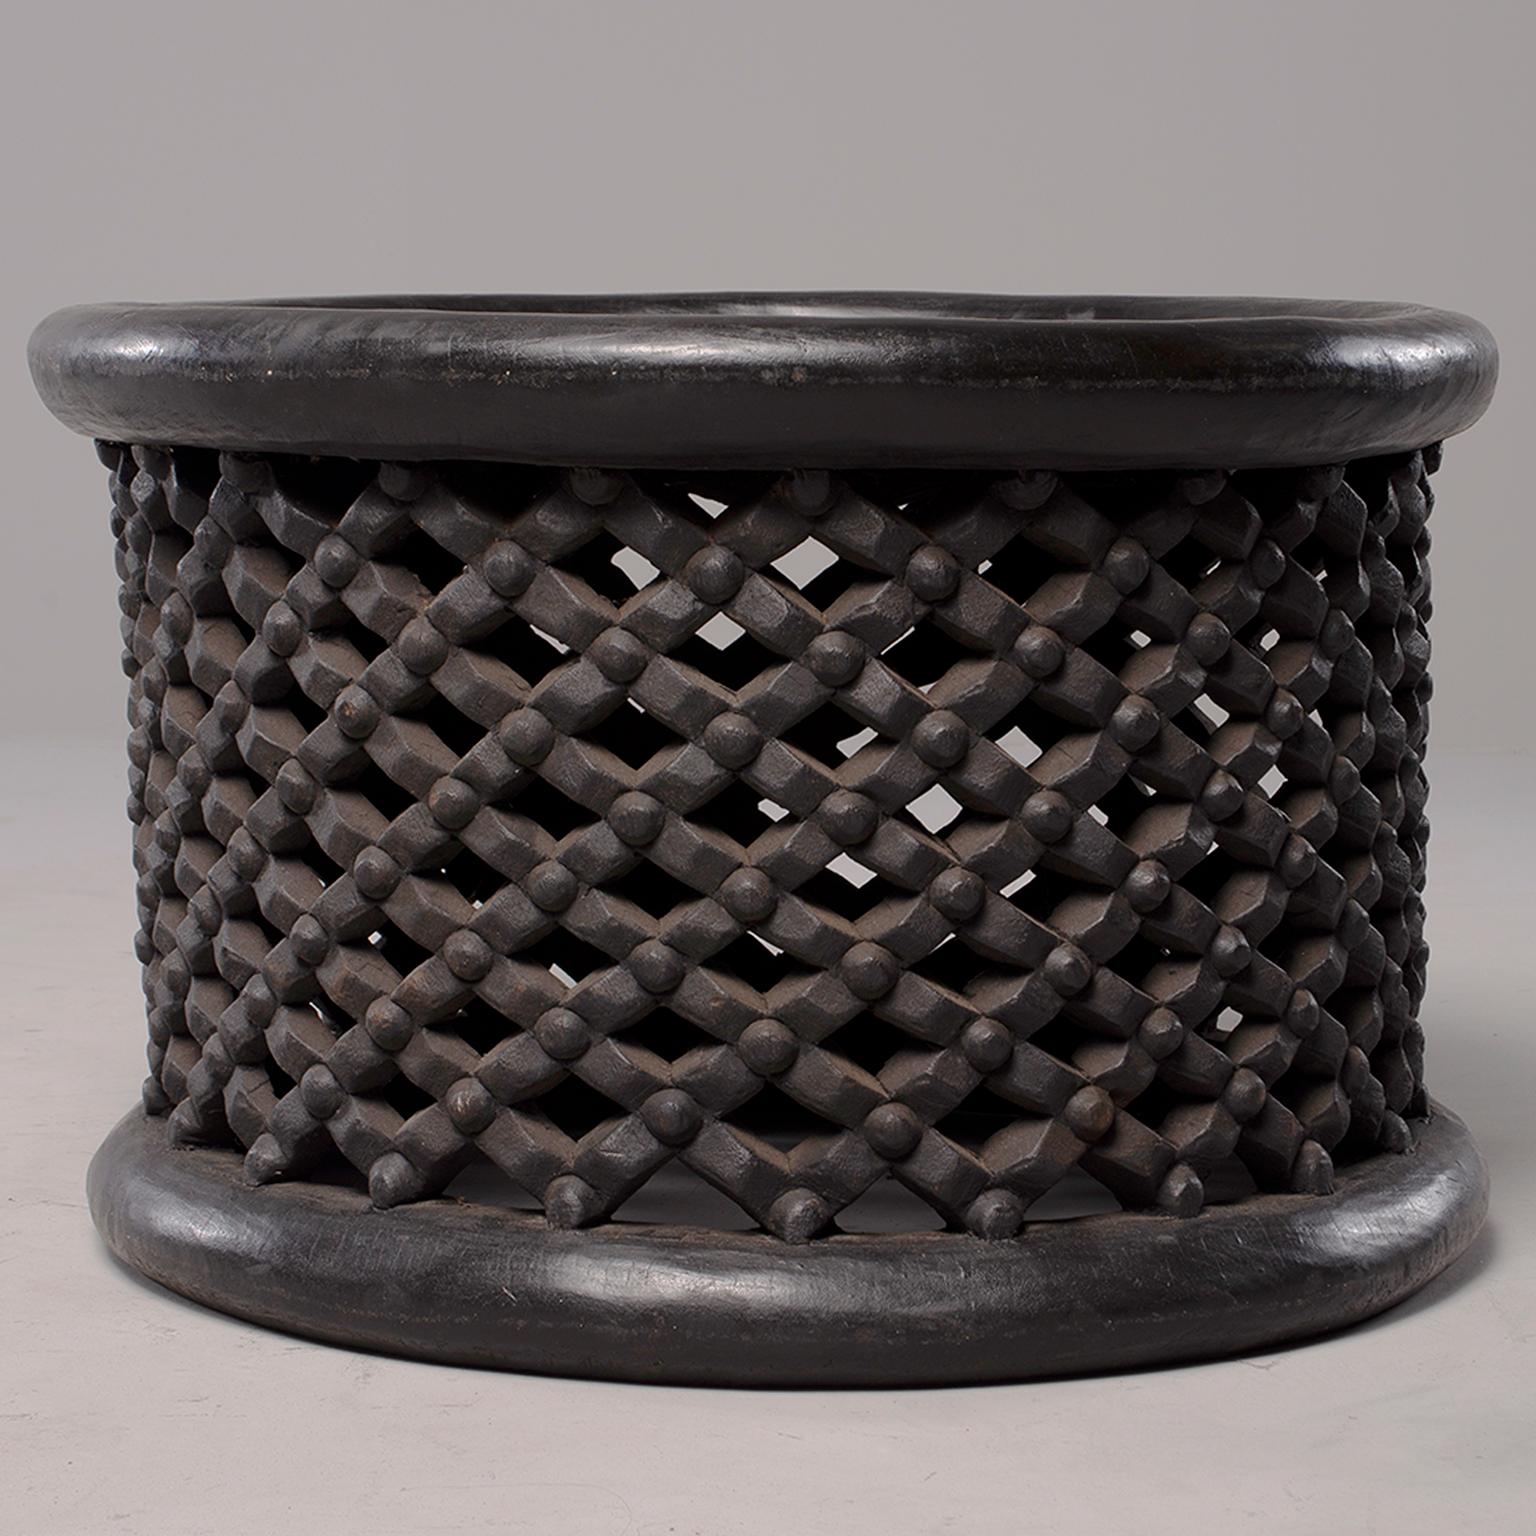 Round table or stool from Bamileke people in Cameroon is made of dark stained carved wood with an open work grid with knobs pattern, circa 1980s.
 